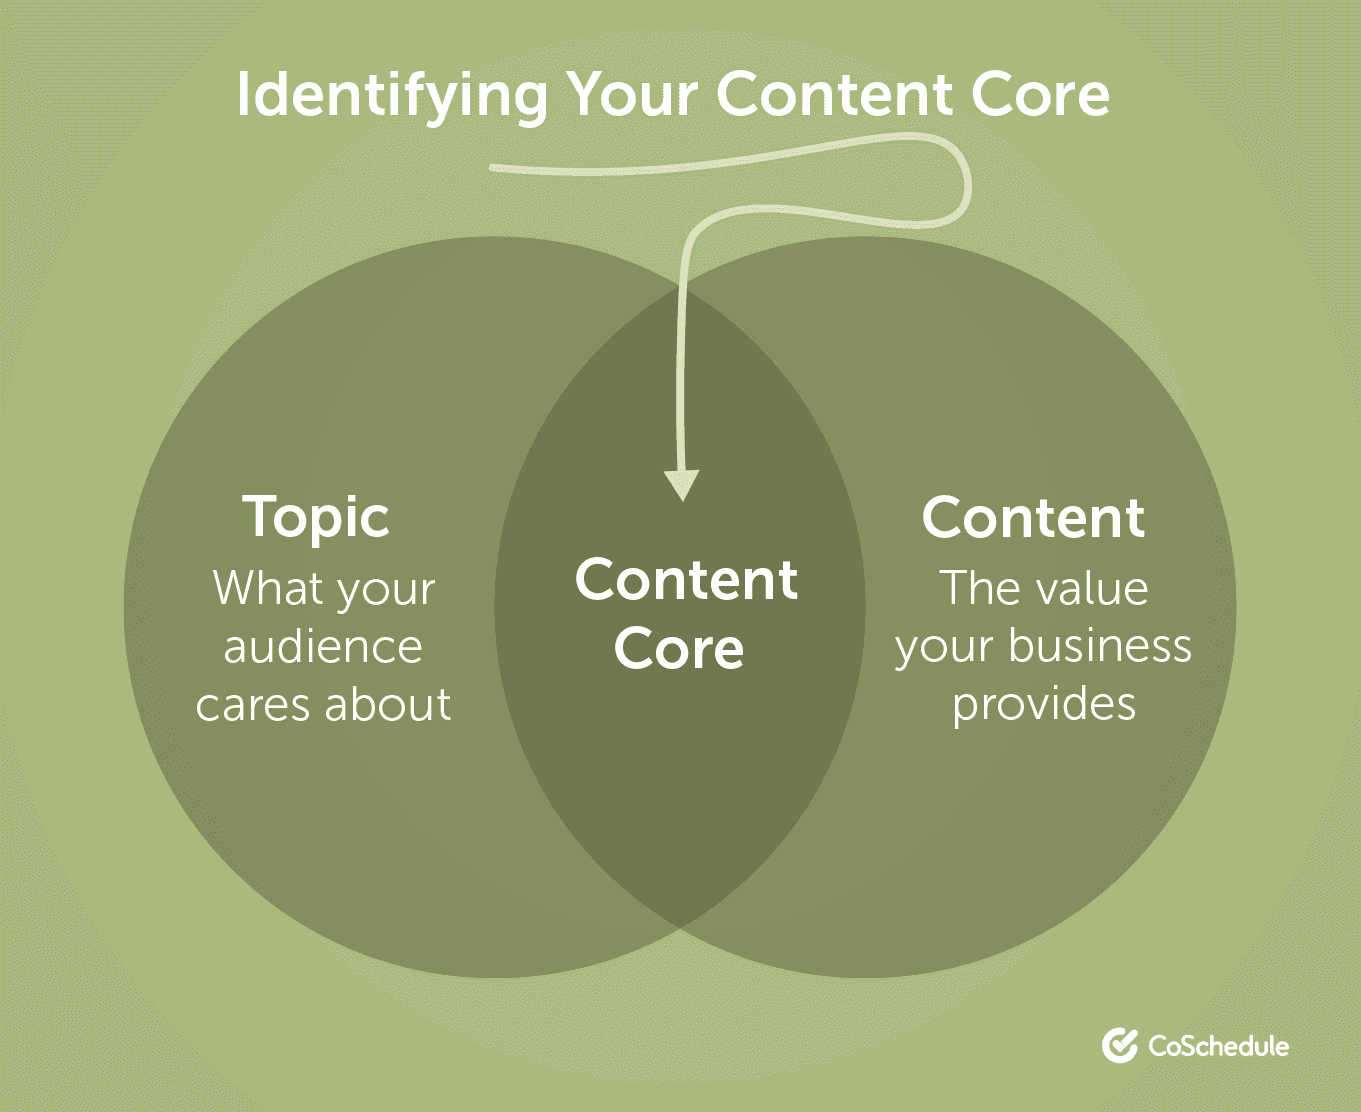 Identifying your content core